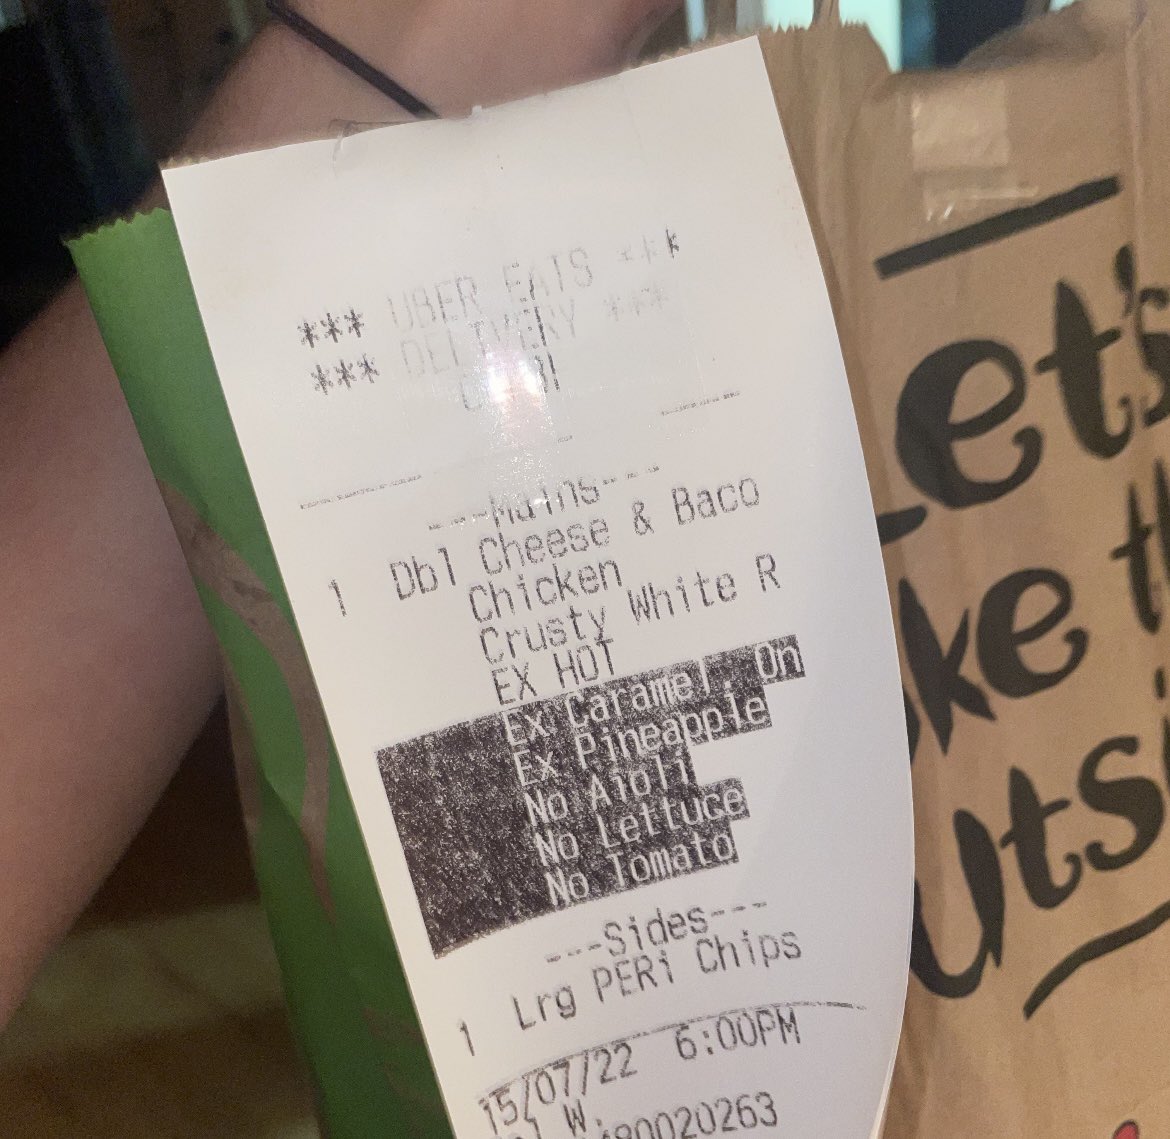 Uber orders got mixed up and we were delivered this…. Tell me this is not the most diabolical nandos order you’ve ever seen 🤯